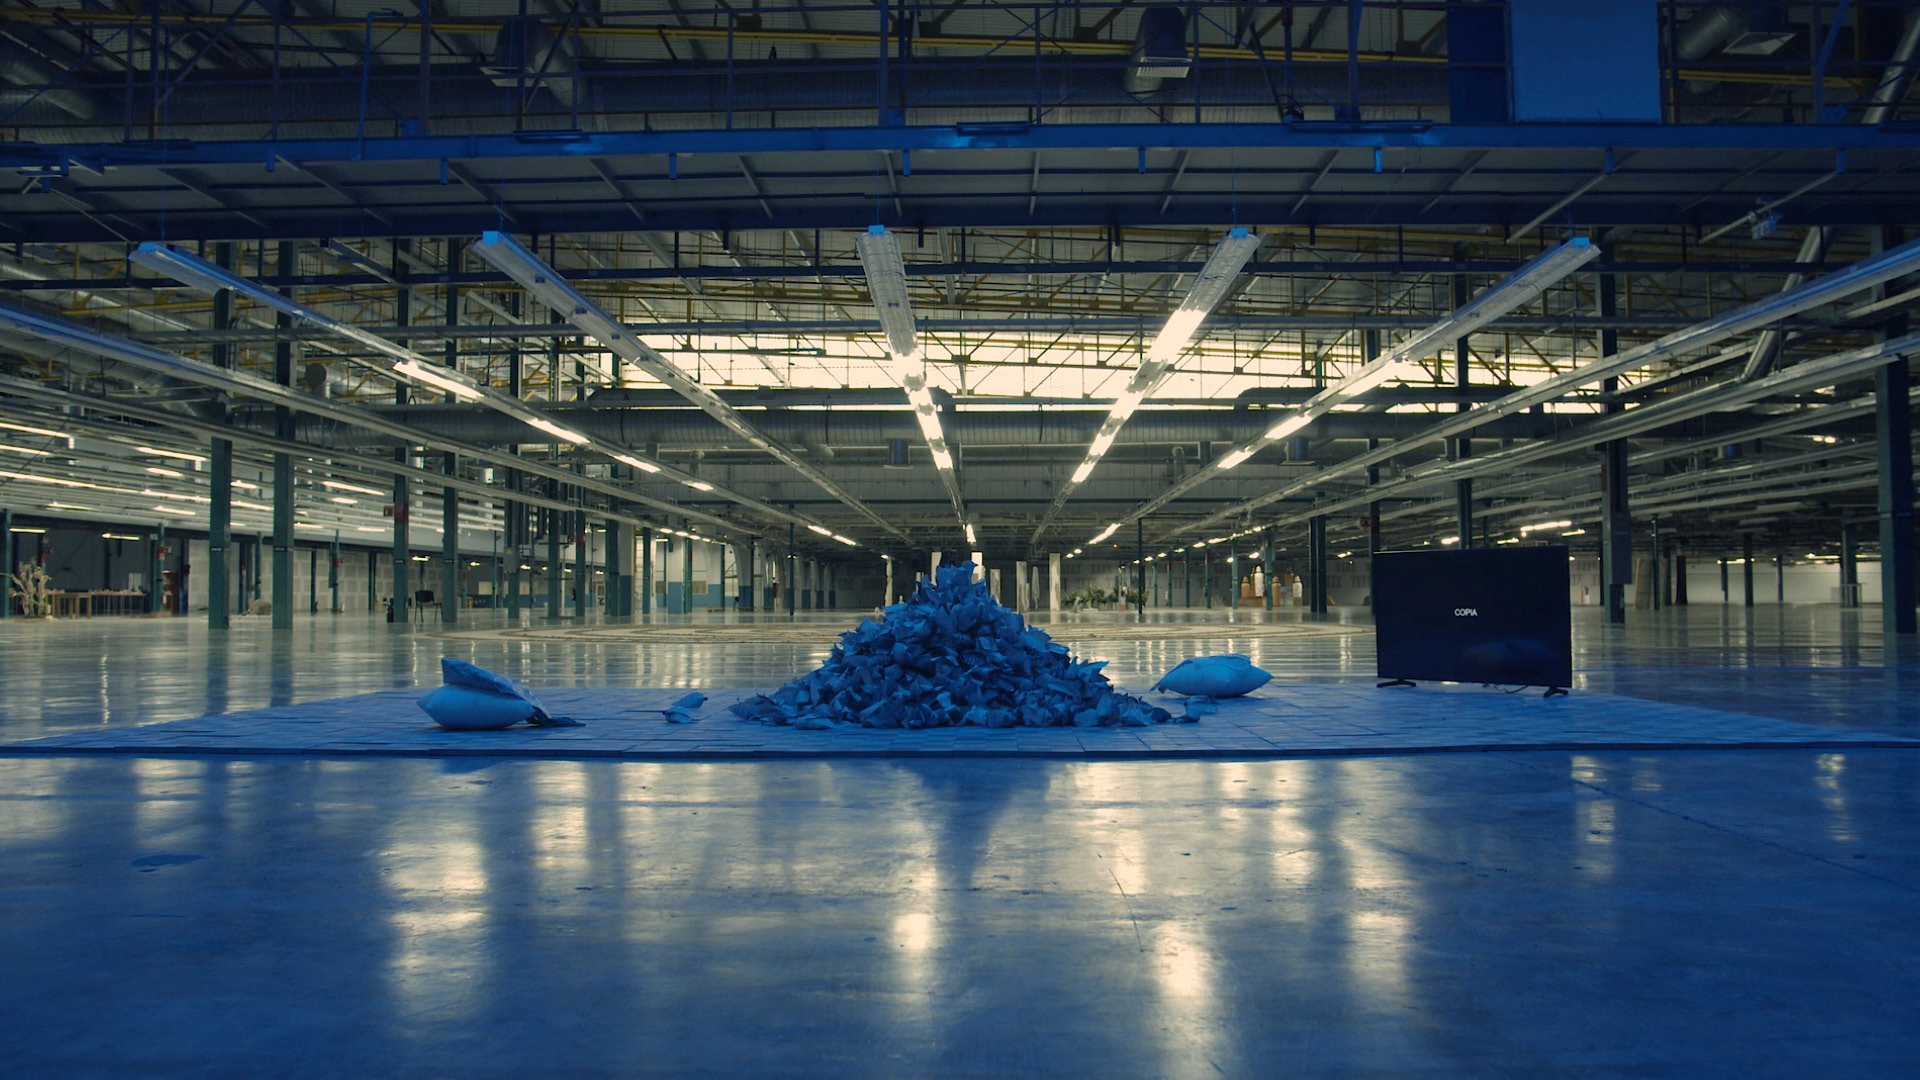 An art installation featuring a mountain of folded and crumpled paper next to a large television screen in an empty, blue-lit warehouse space